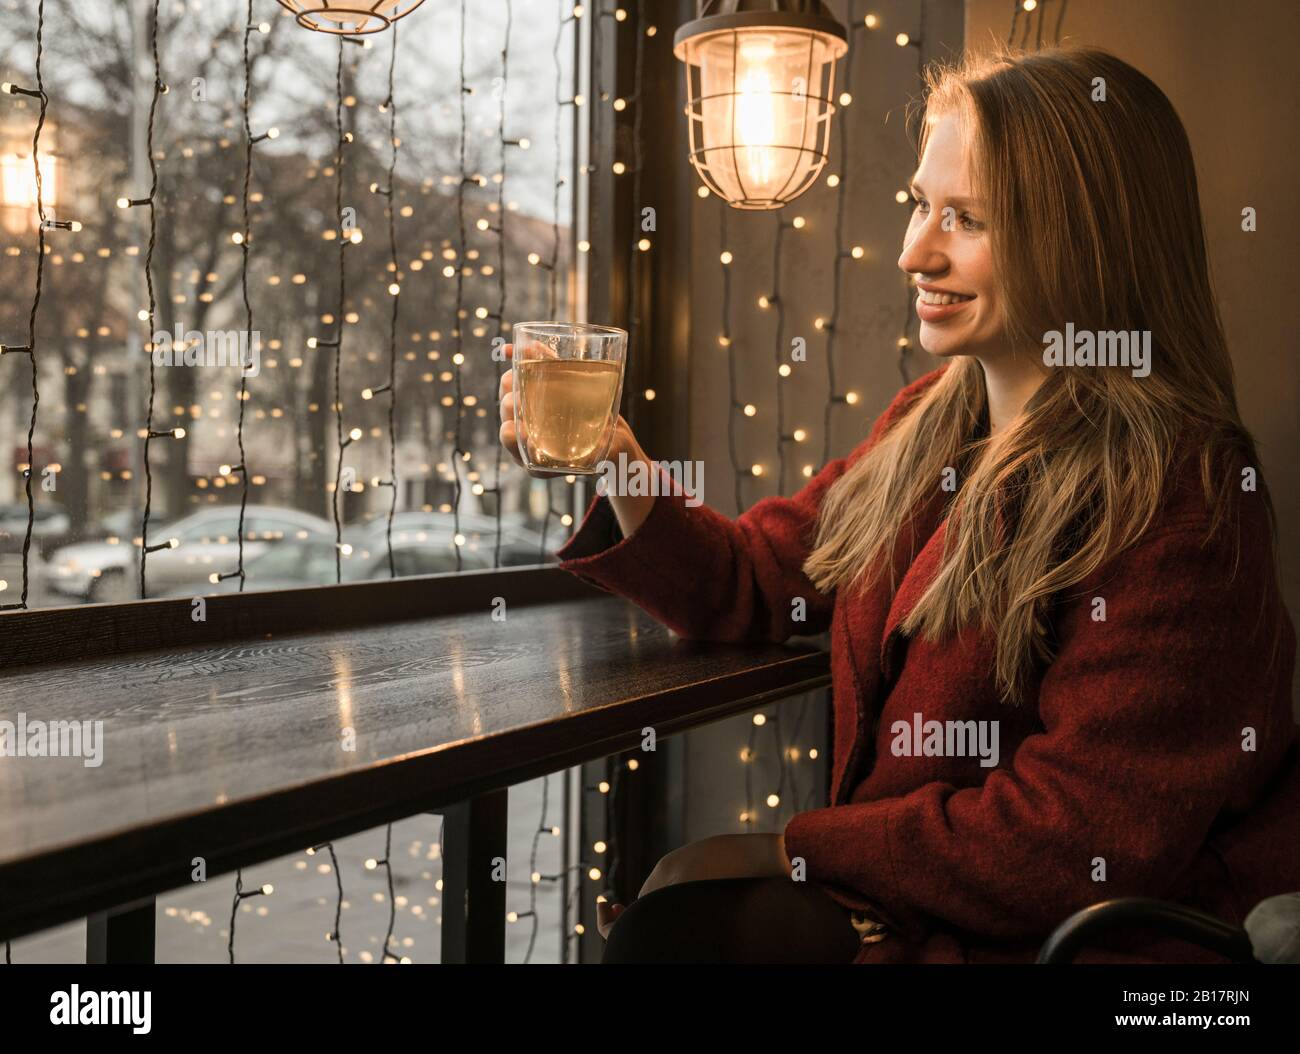 Smiling young woman with cup of tea in a coffee shop Stock Photo